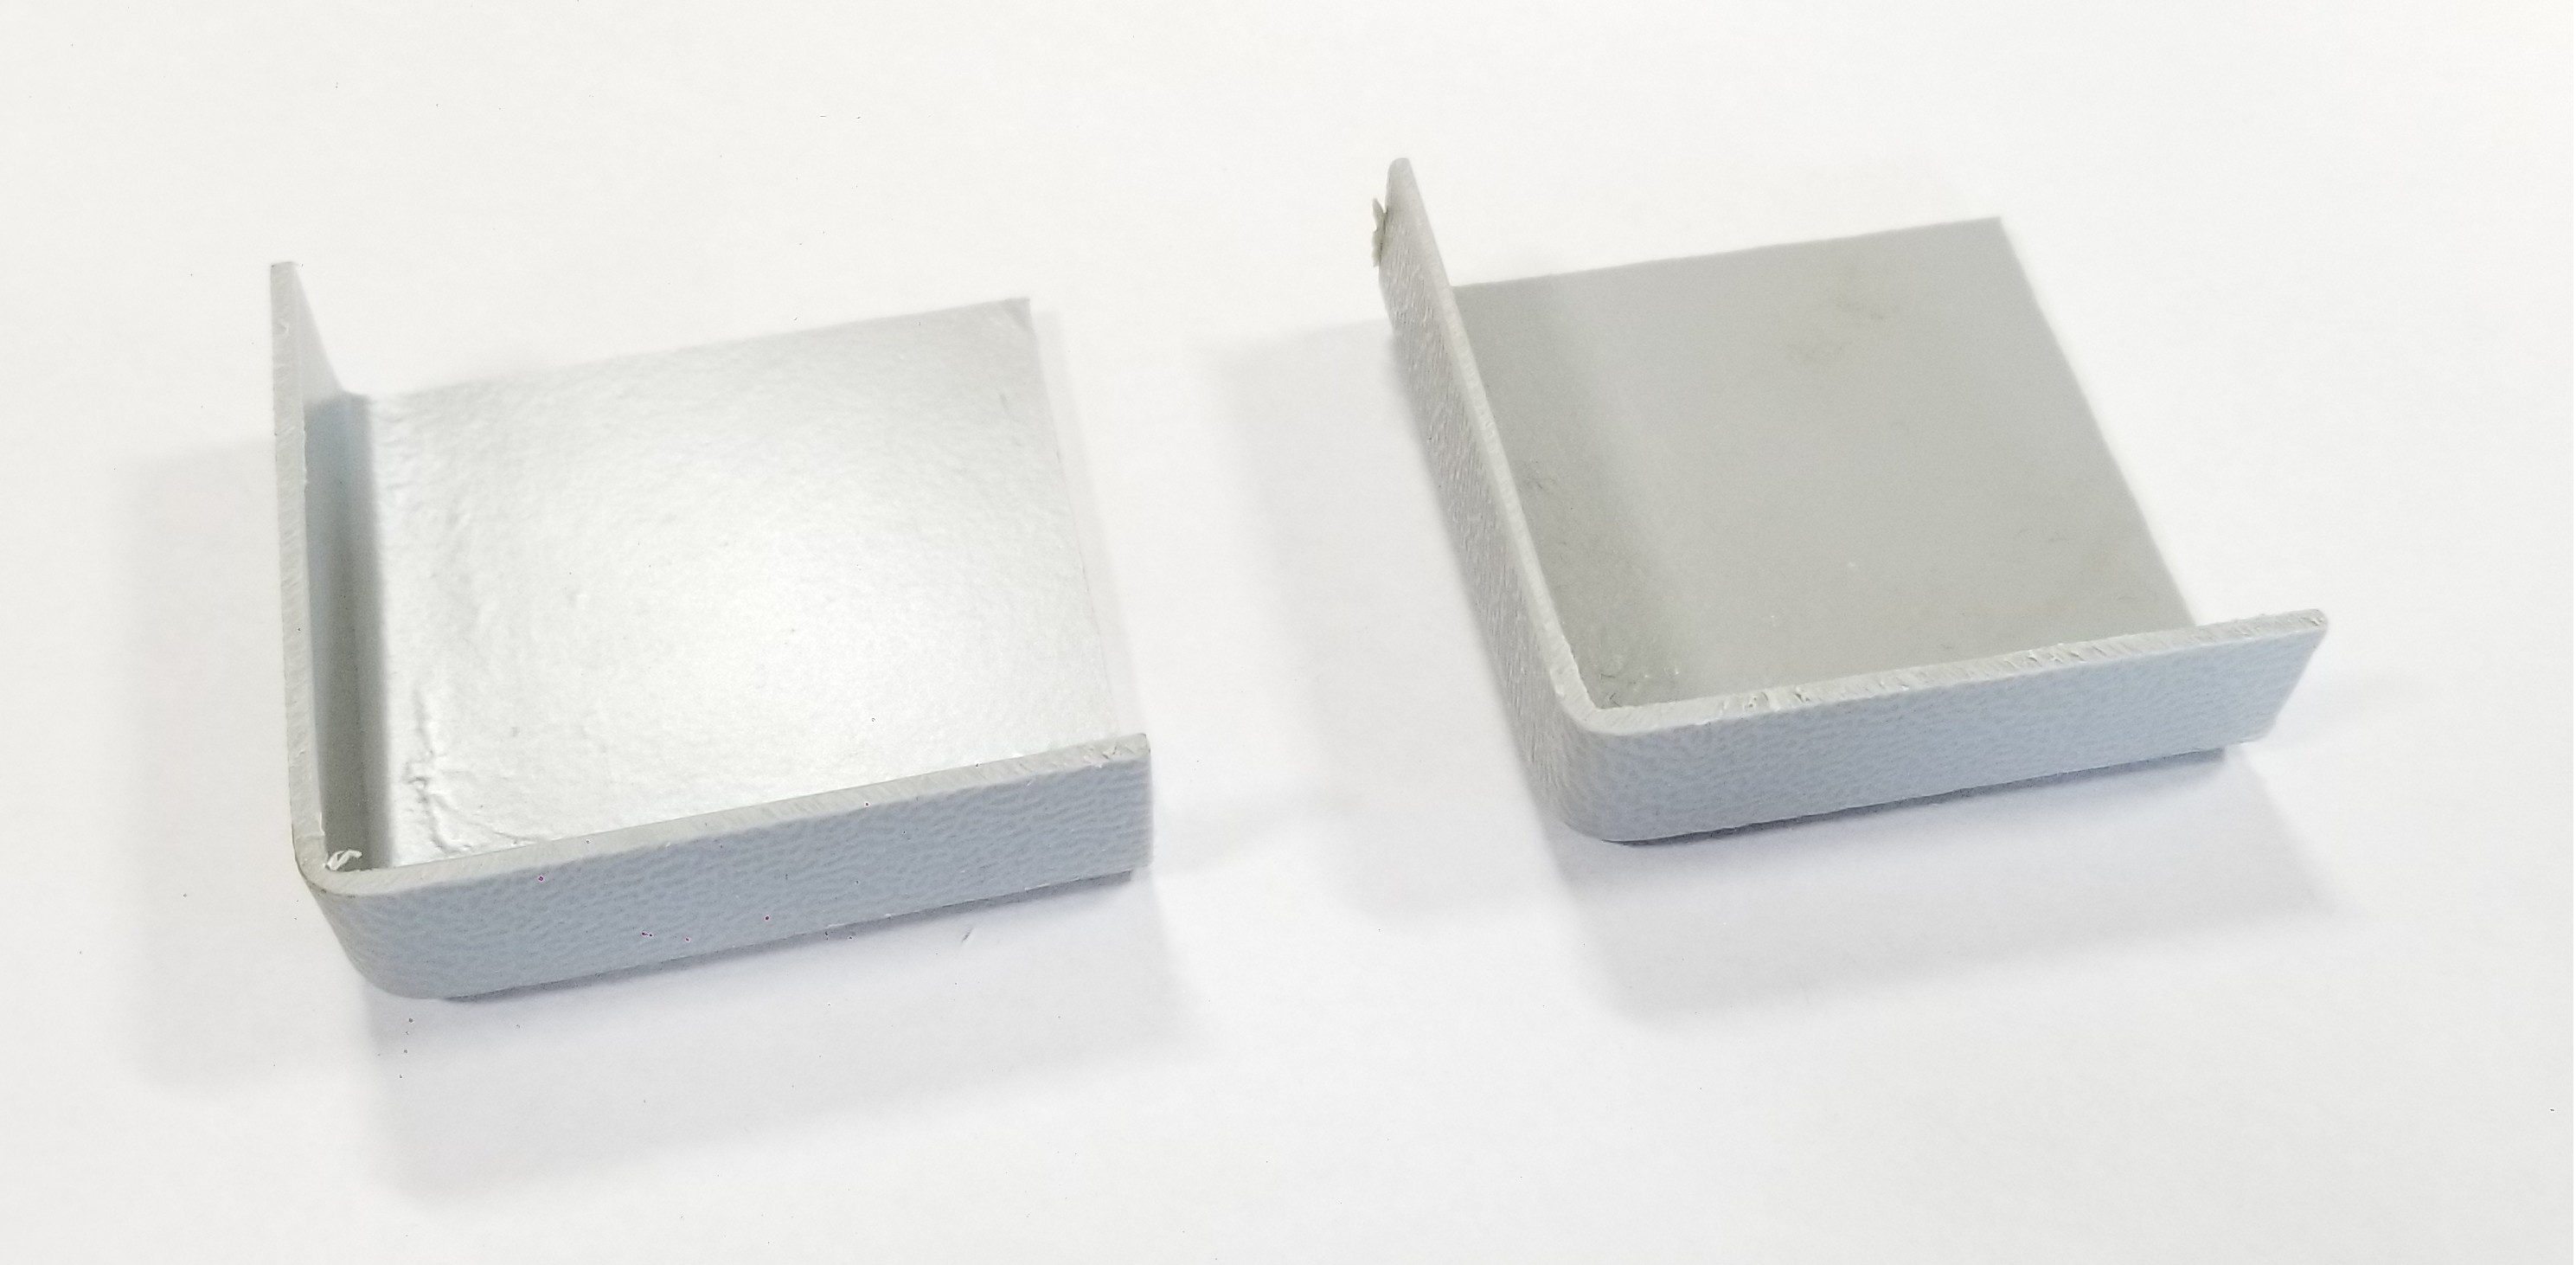 Plastic Gray Corner Caps for Pop Up Campers - 2Pack